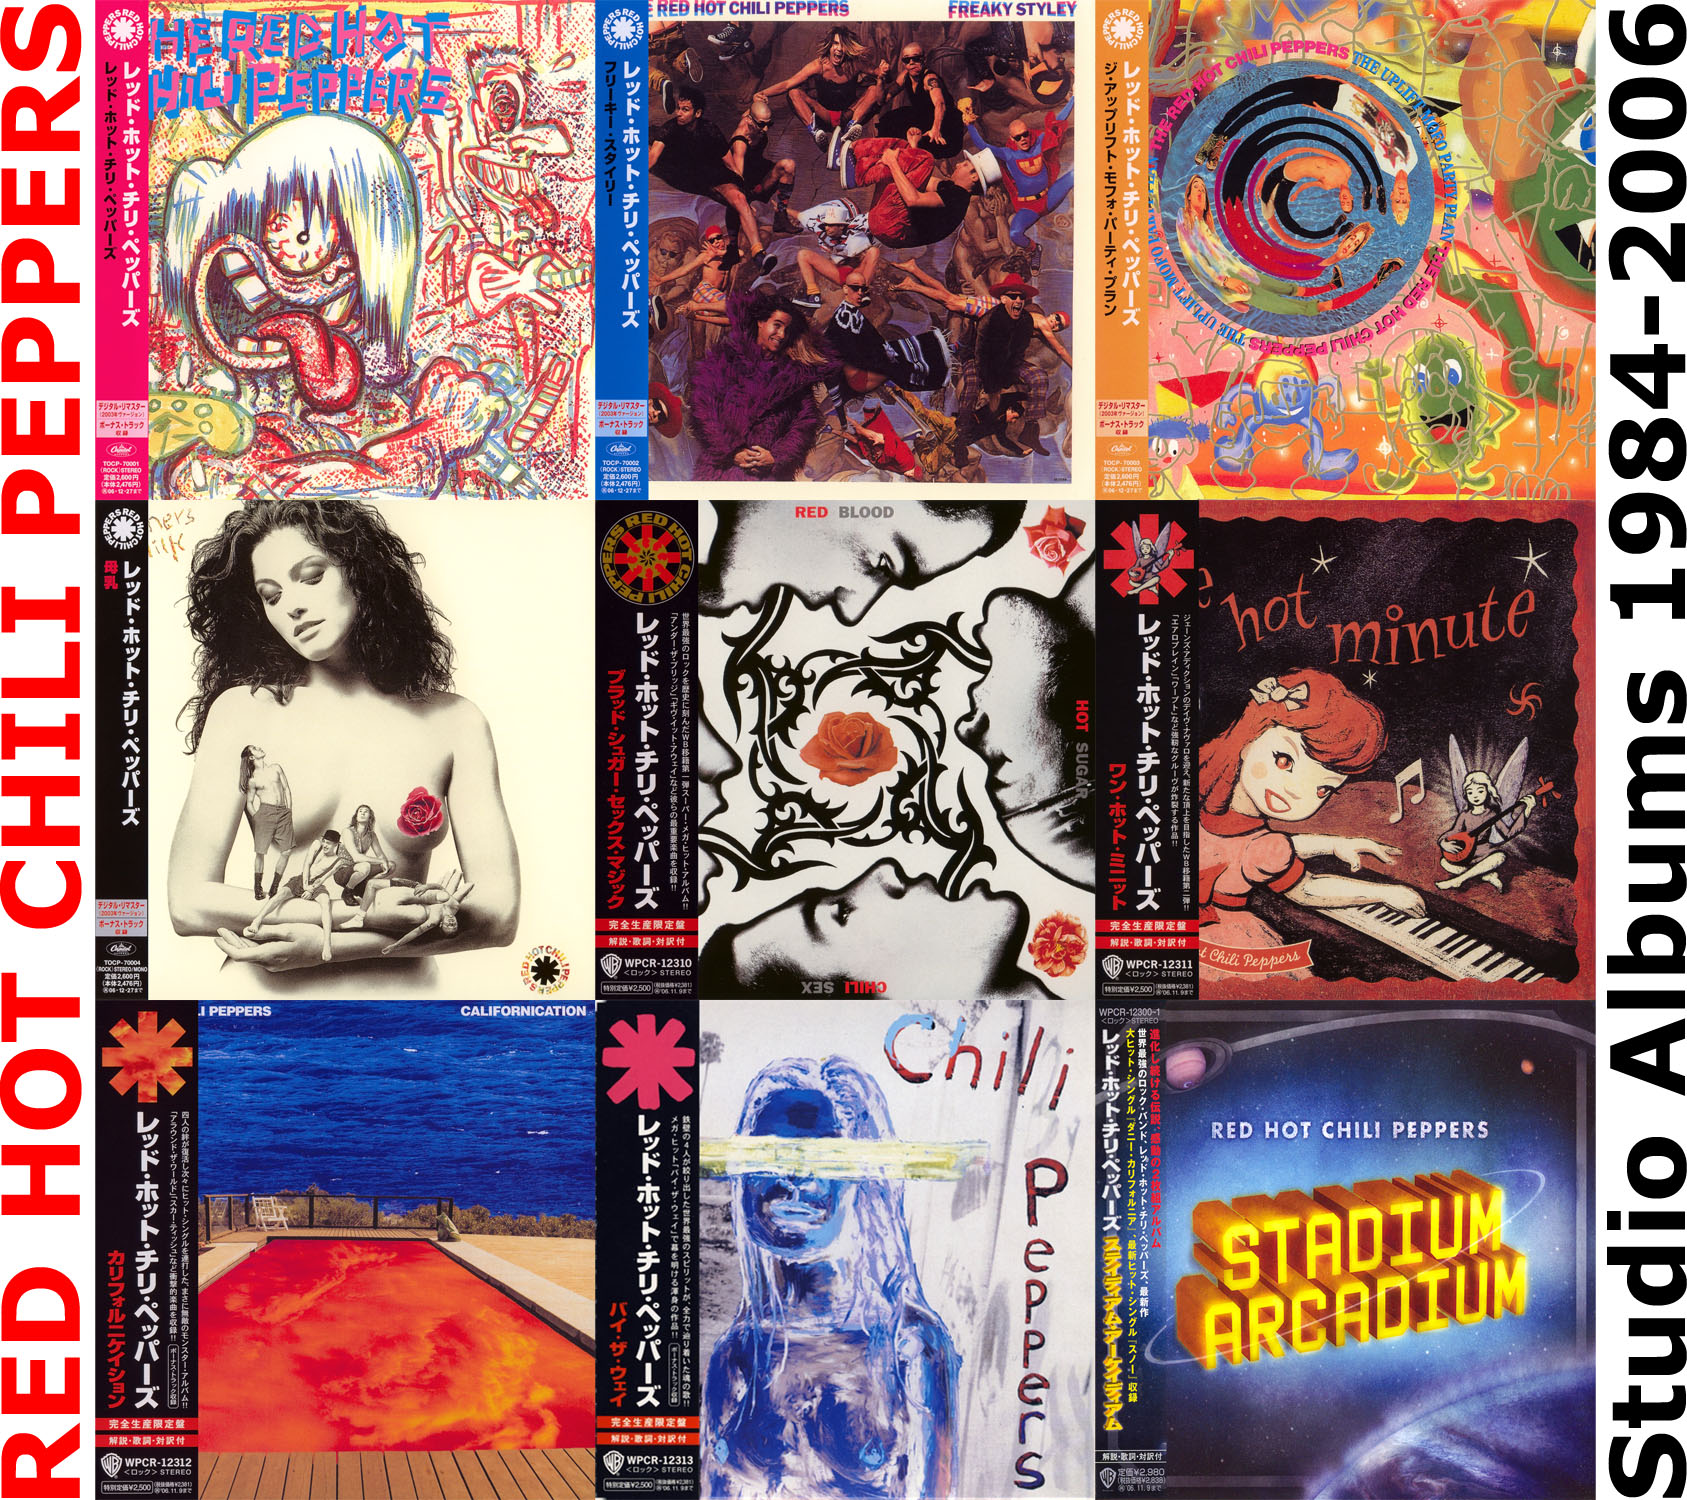 Red Hot Chili Peppers - Studio Albums Collection 1984-2006 Japanese Release...